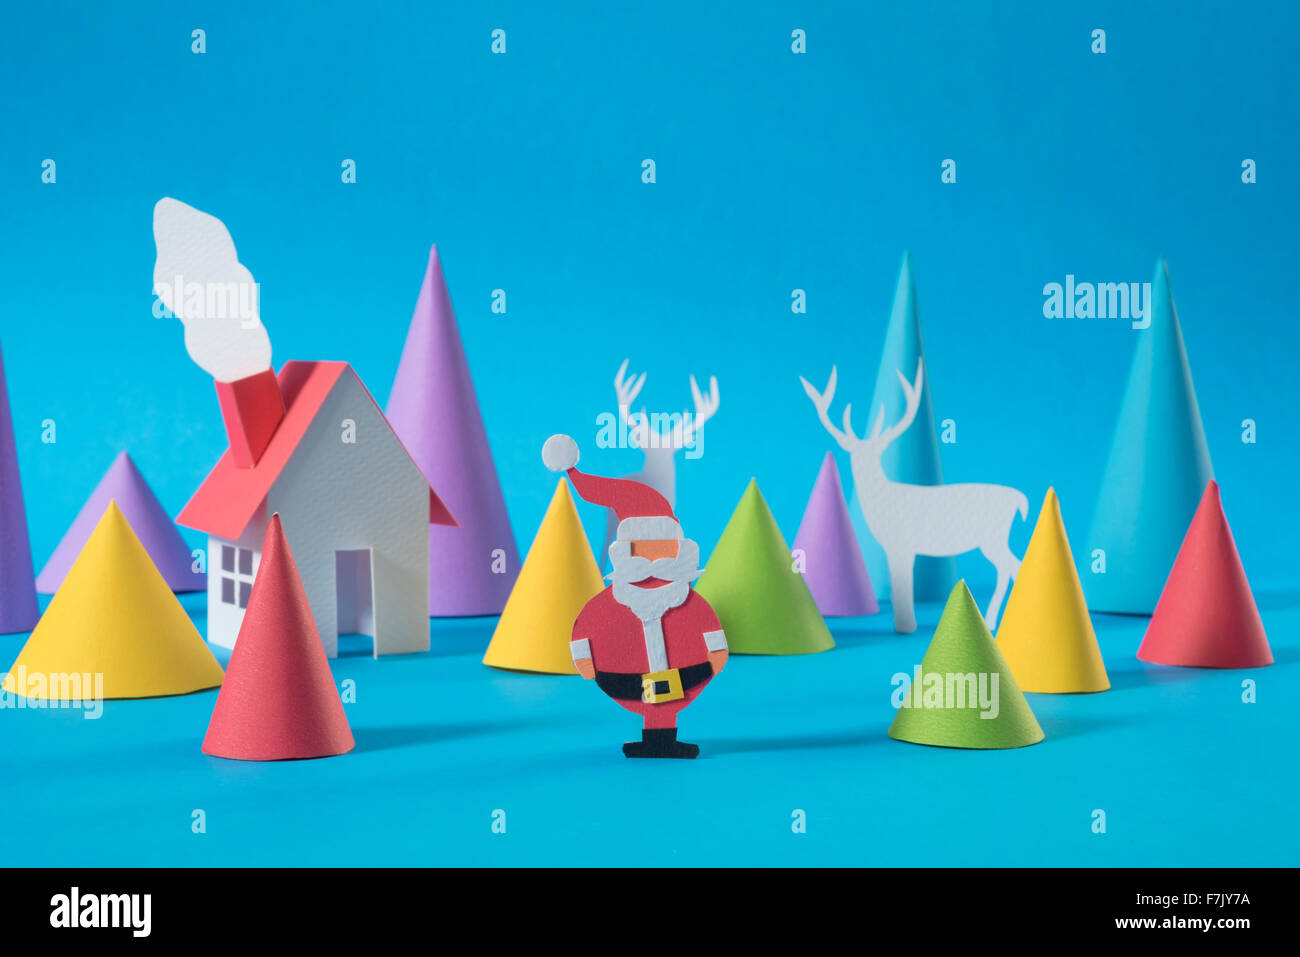 Christmas paper cut house with handmade santa and deers on colorful blue background. Ideal for xmas greeting card, holiday Stock Photo